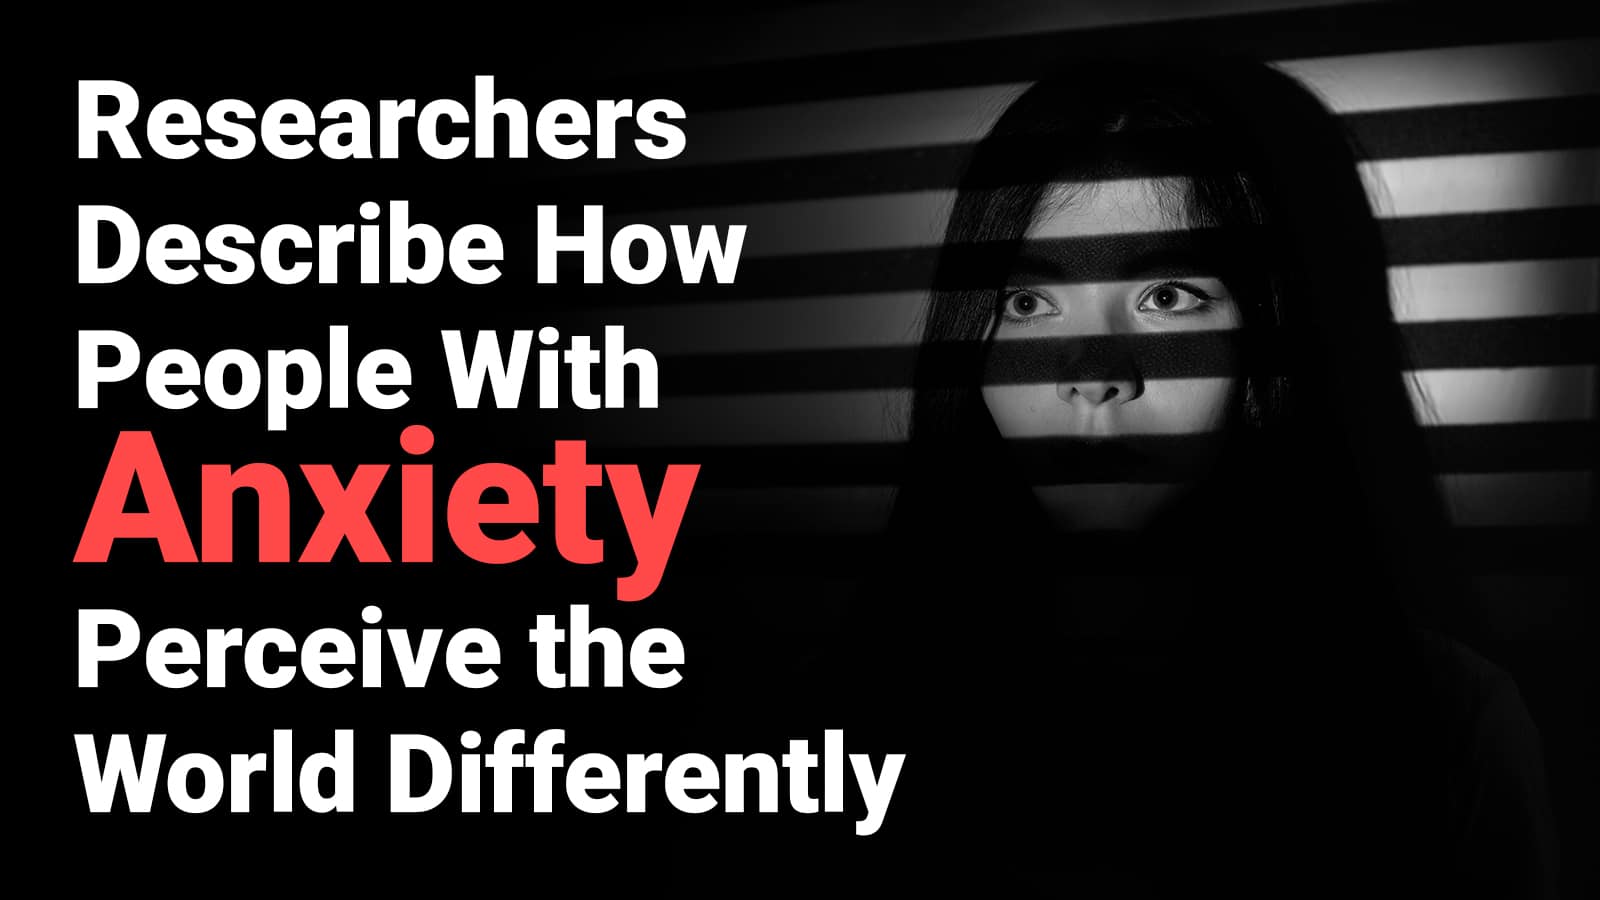 Researchers Describe How People With Anxiety Perceive the World Differently